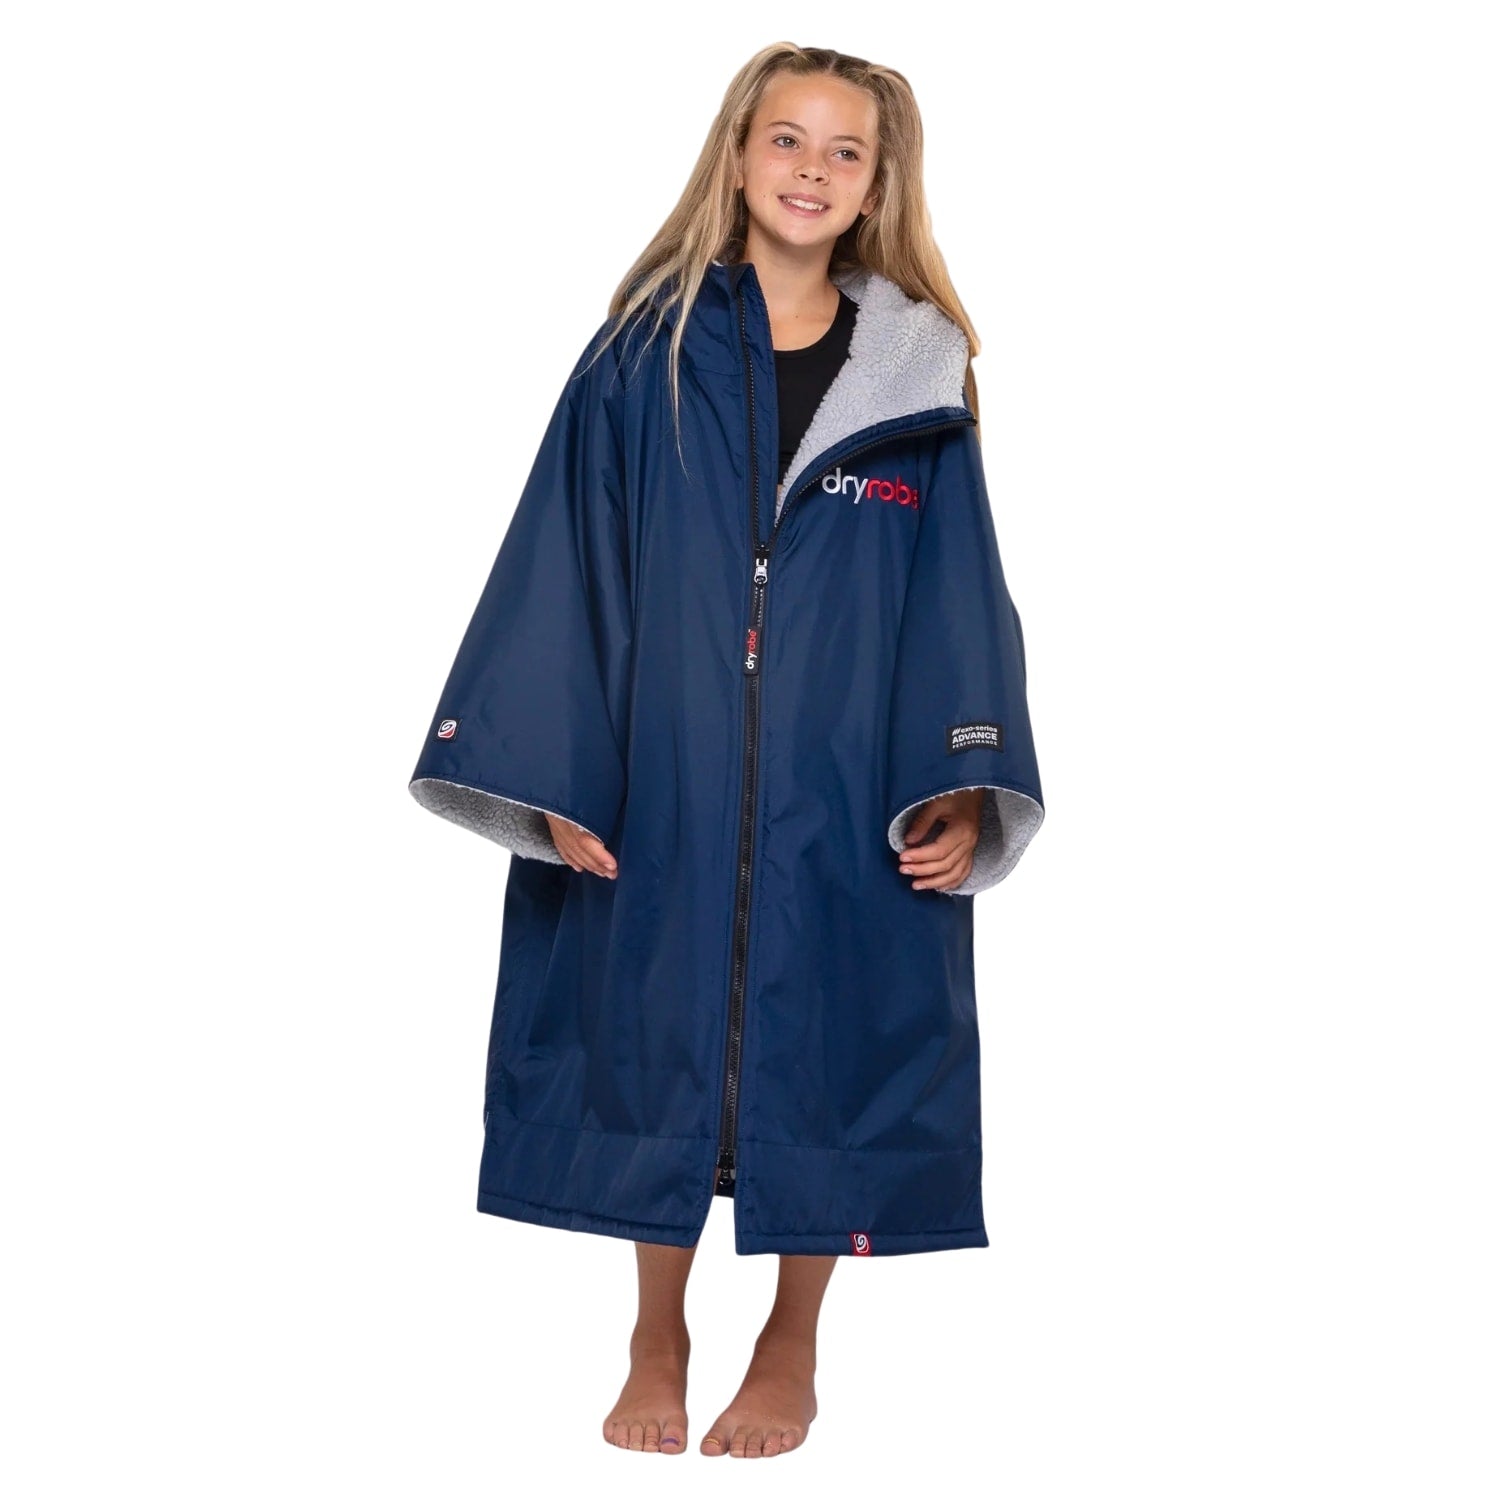 Dryrobe Youth Kids Advance Short Sleeve Drying & Changing Robe - Navy Blue/Grey - Changing Robe Poncho Towel by Dryrobe 10-14 Years